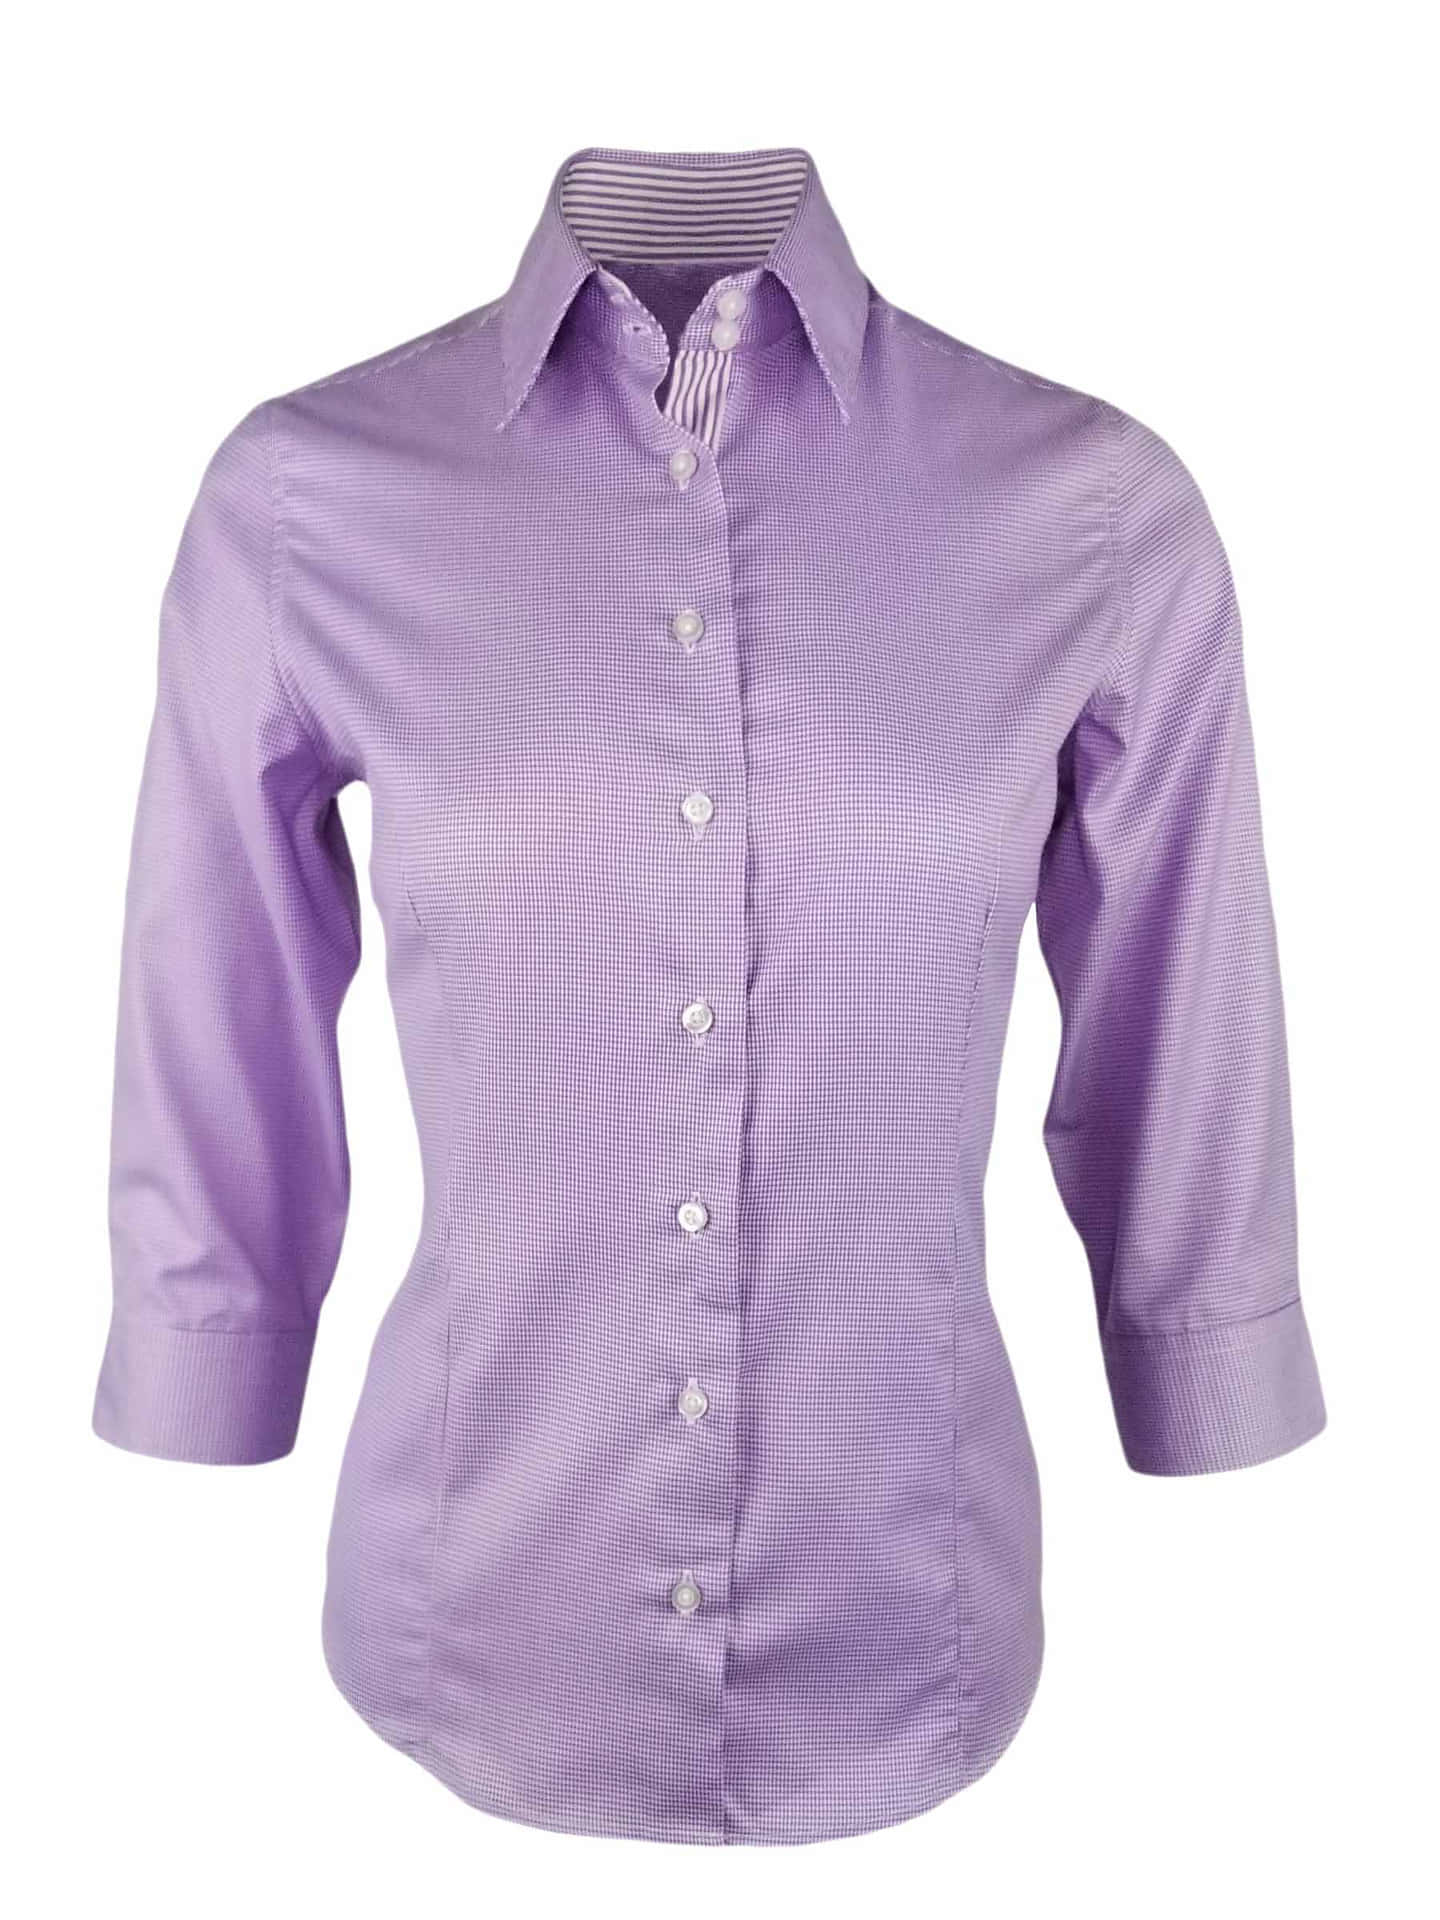 A Classic Purple Shirt for Any Occasion Wallpaper